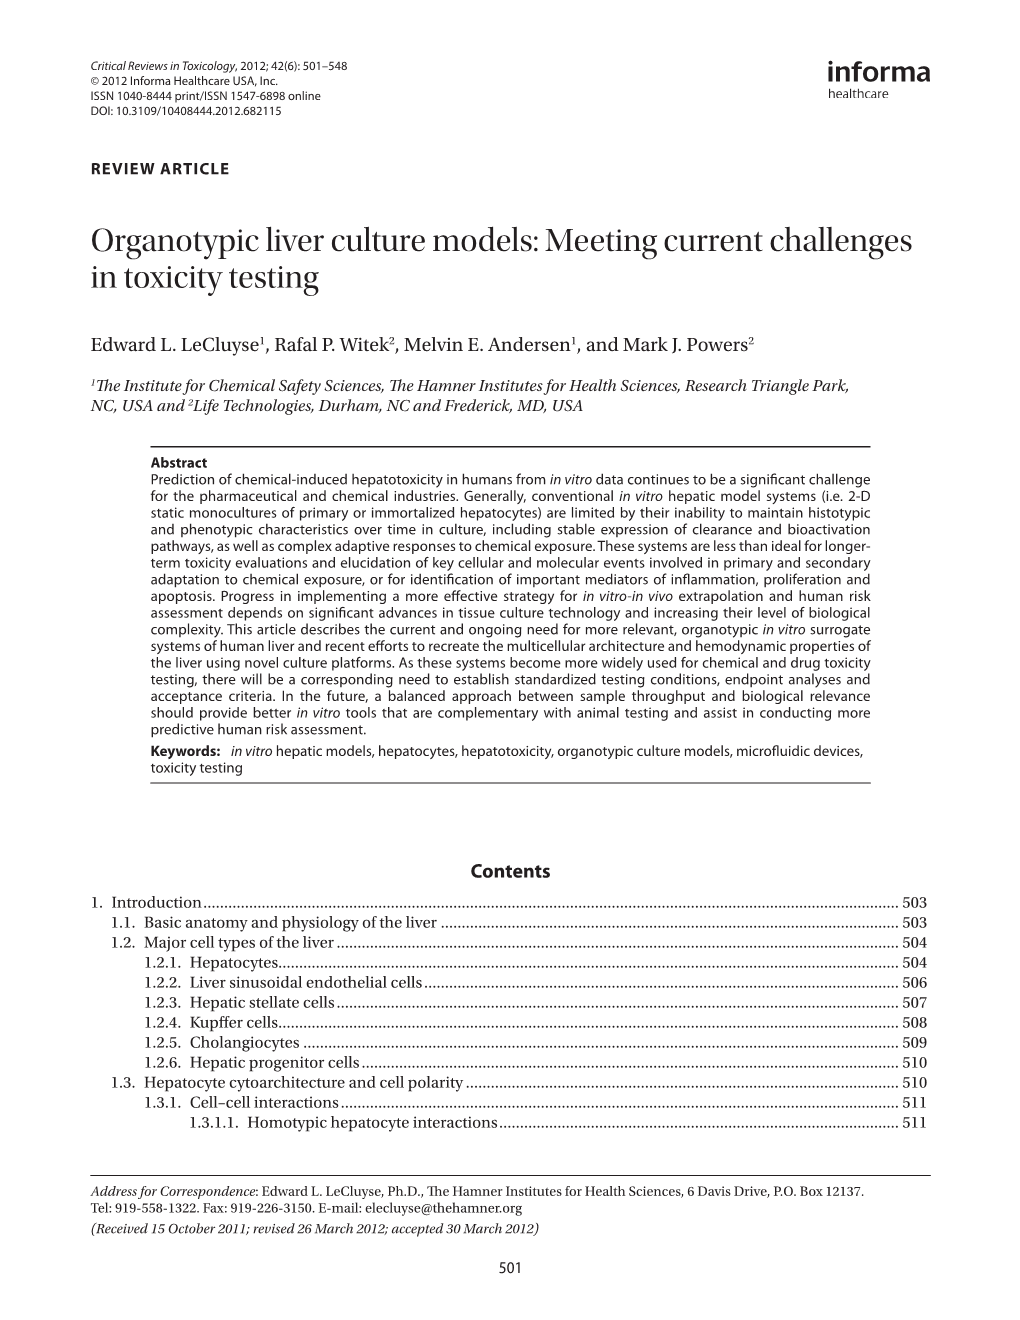 Organotypic Liver Culture Models: Meeting Current Challenges In